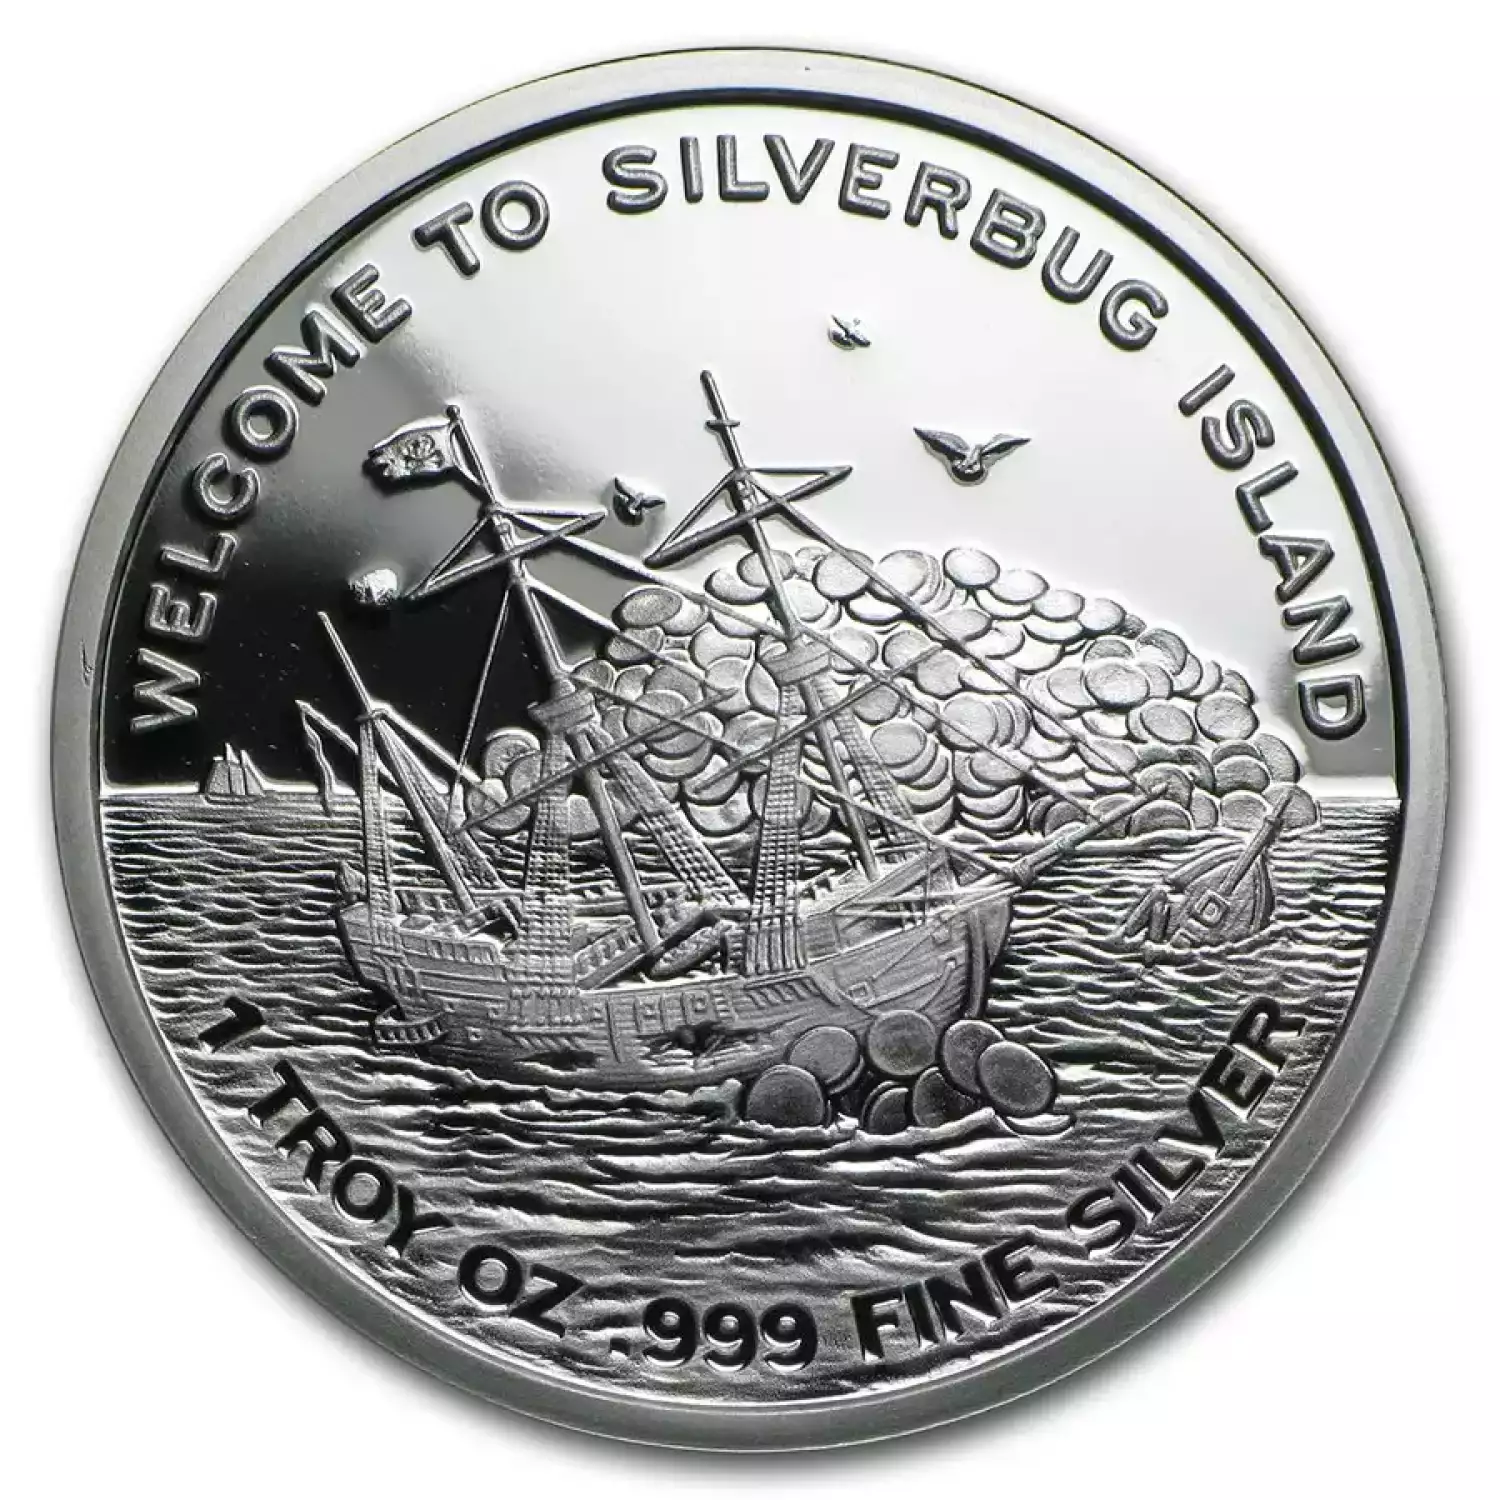 Welcome to Silverbugs Island 1 oz proof coin (2)